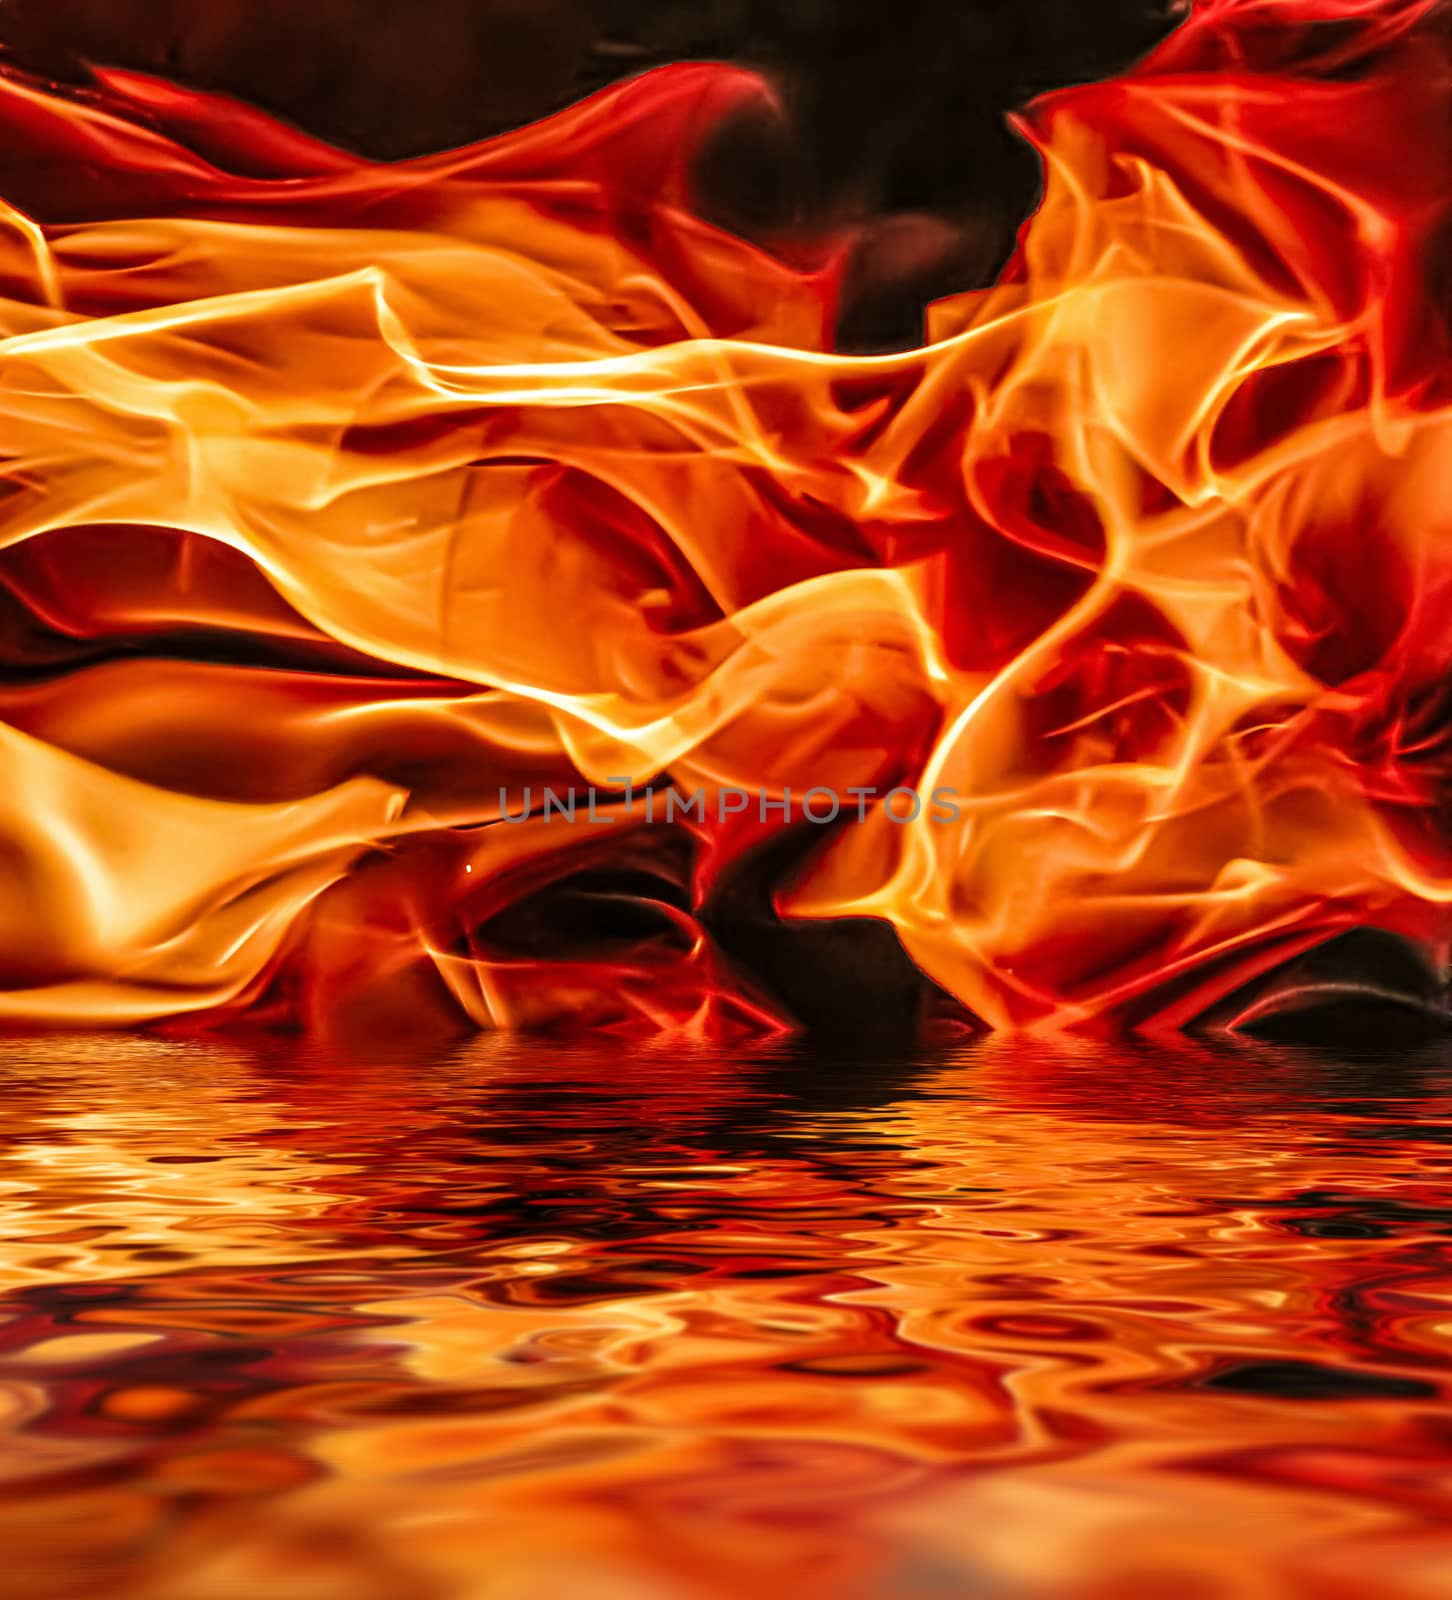 Hot fire flames in water as nature element and abstract background, minimal design